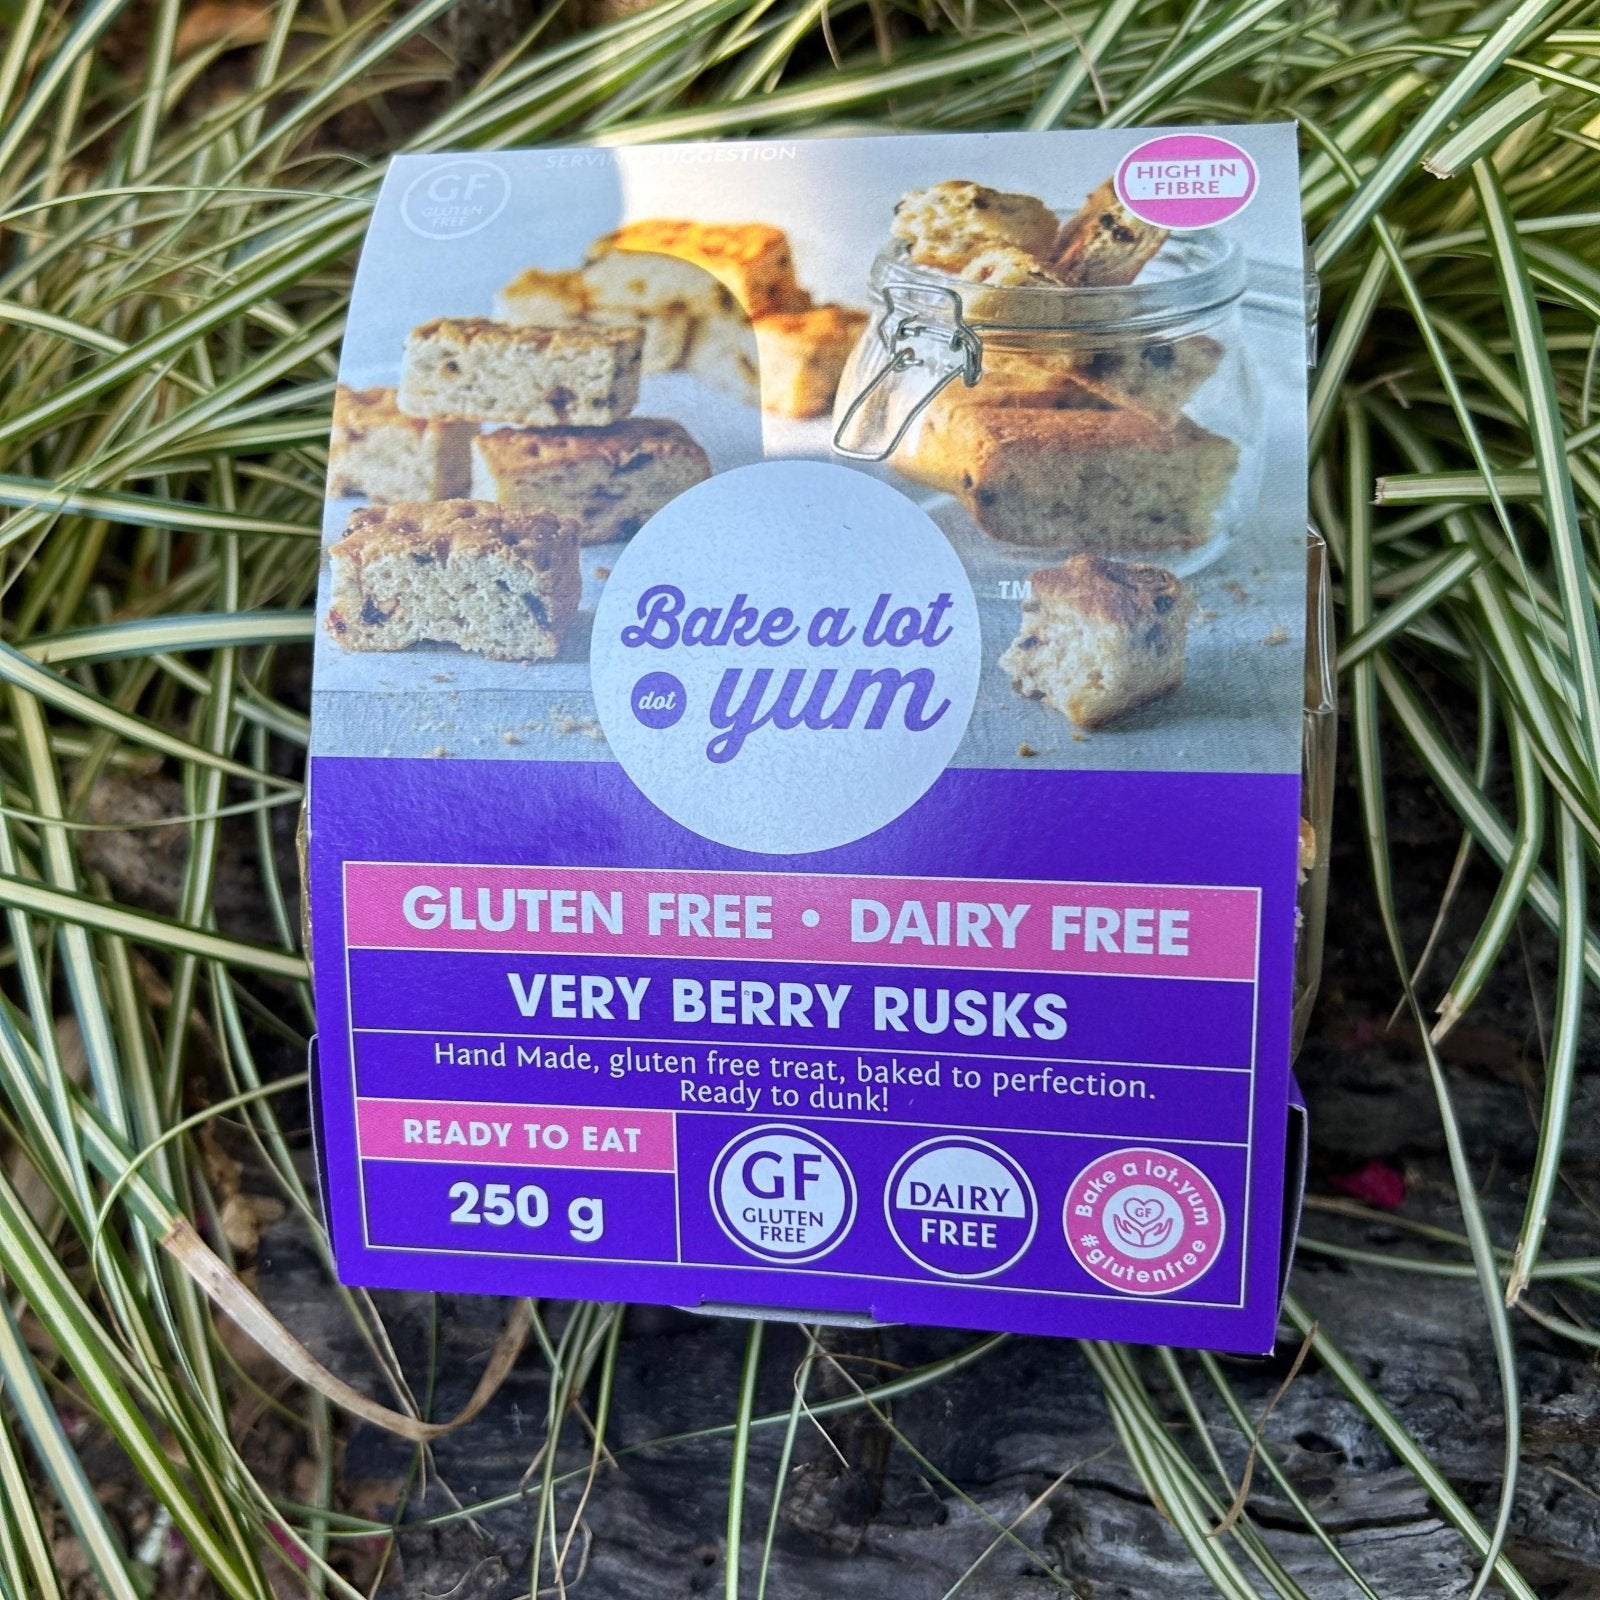 Bake a lot.yum Very Berry Rusks (250g) - The Deli